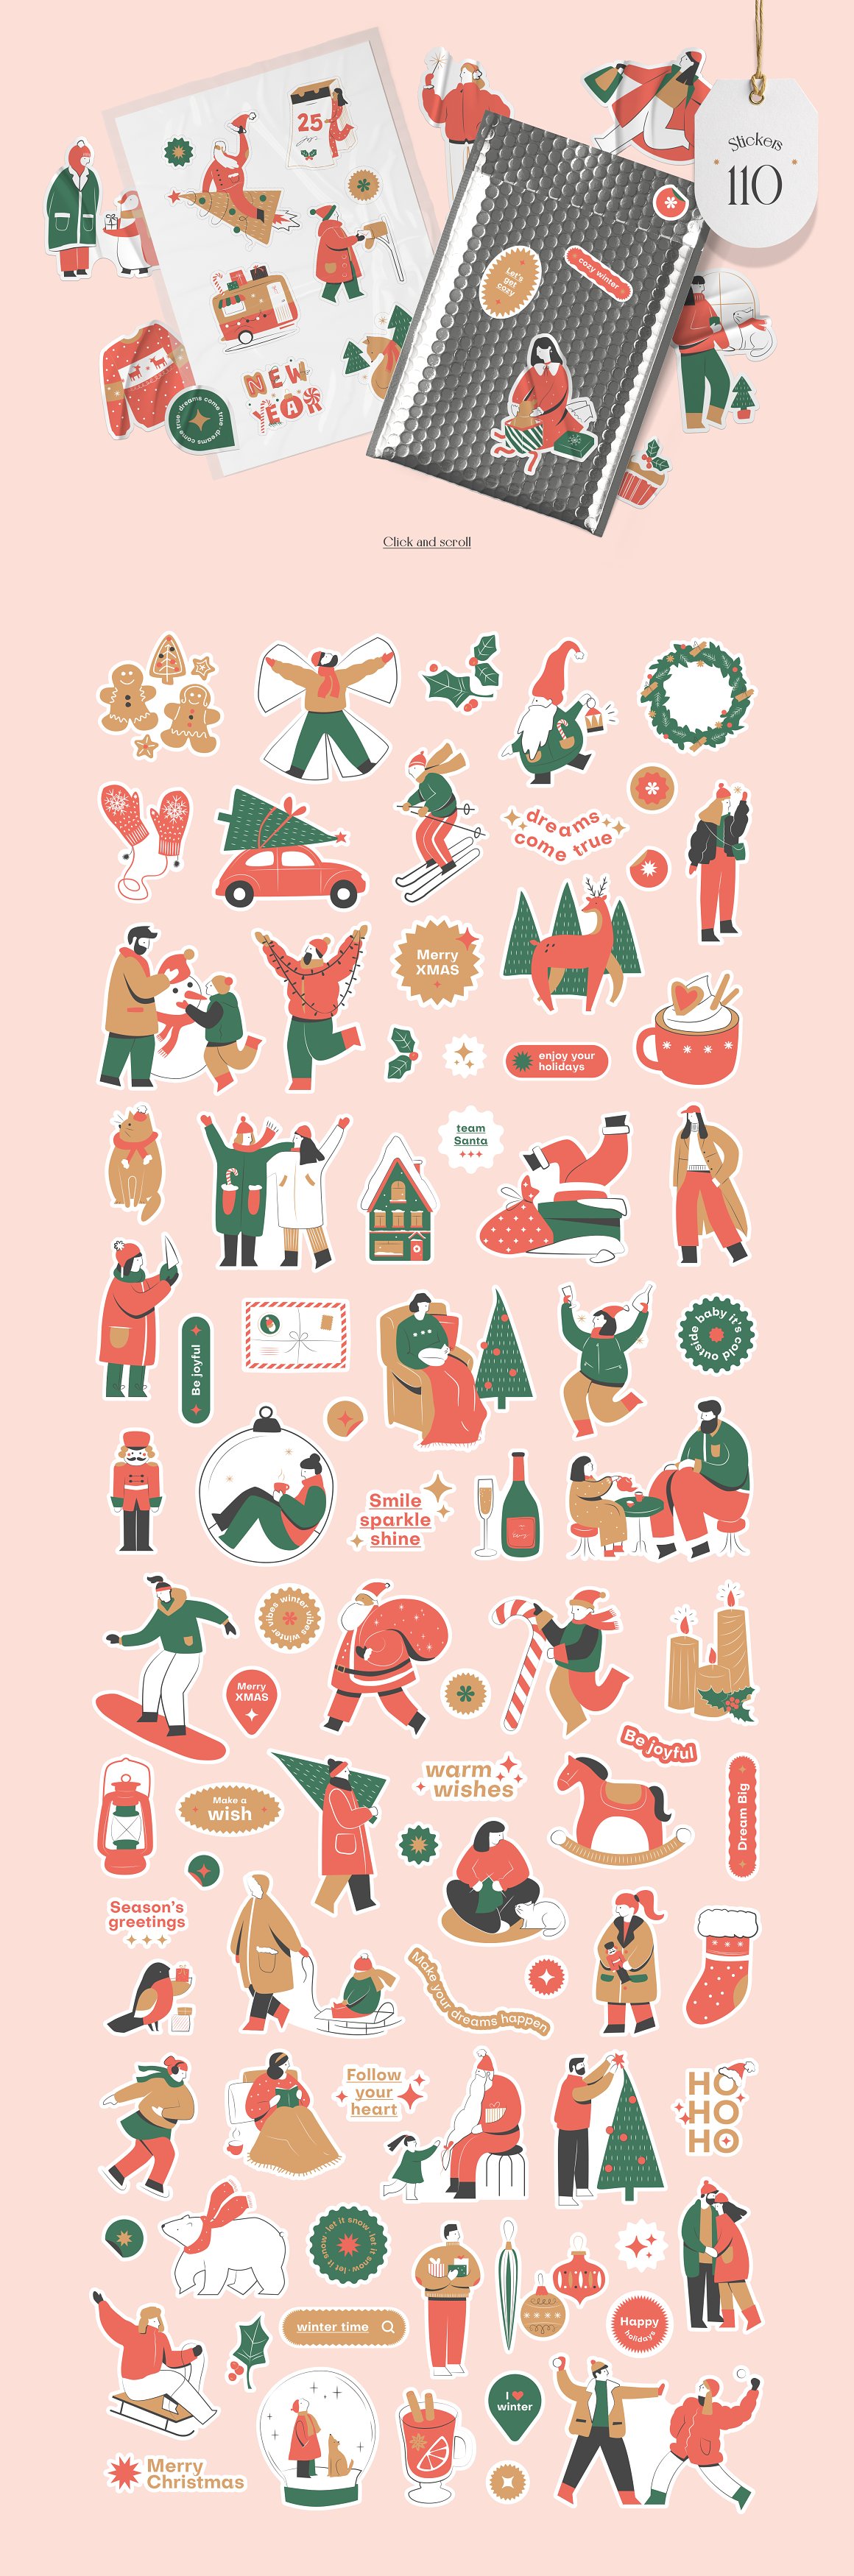 Clipart of 110 various illustrations of christmas.